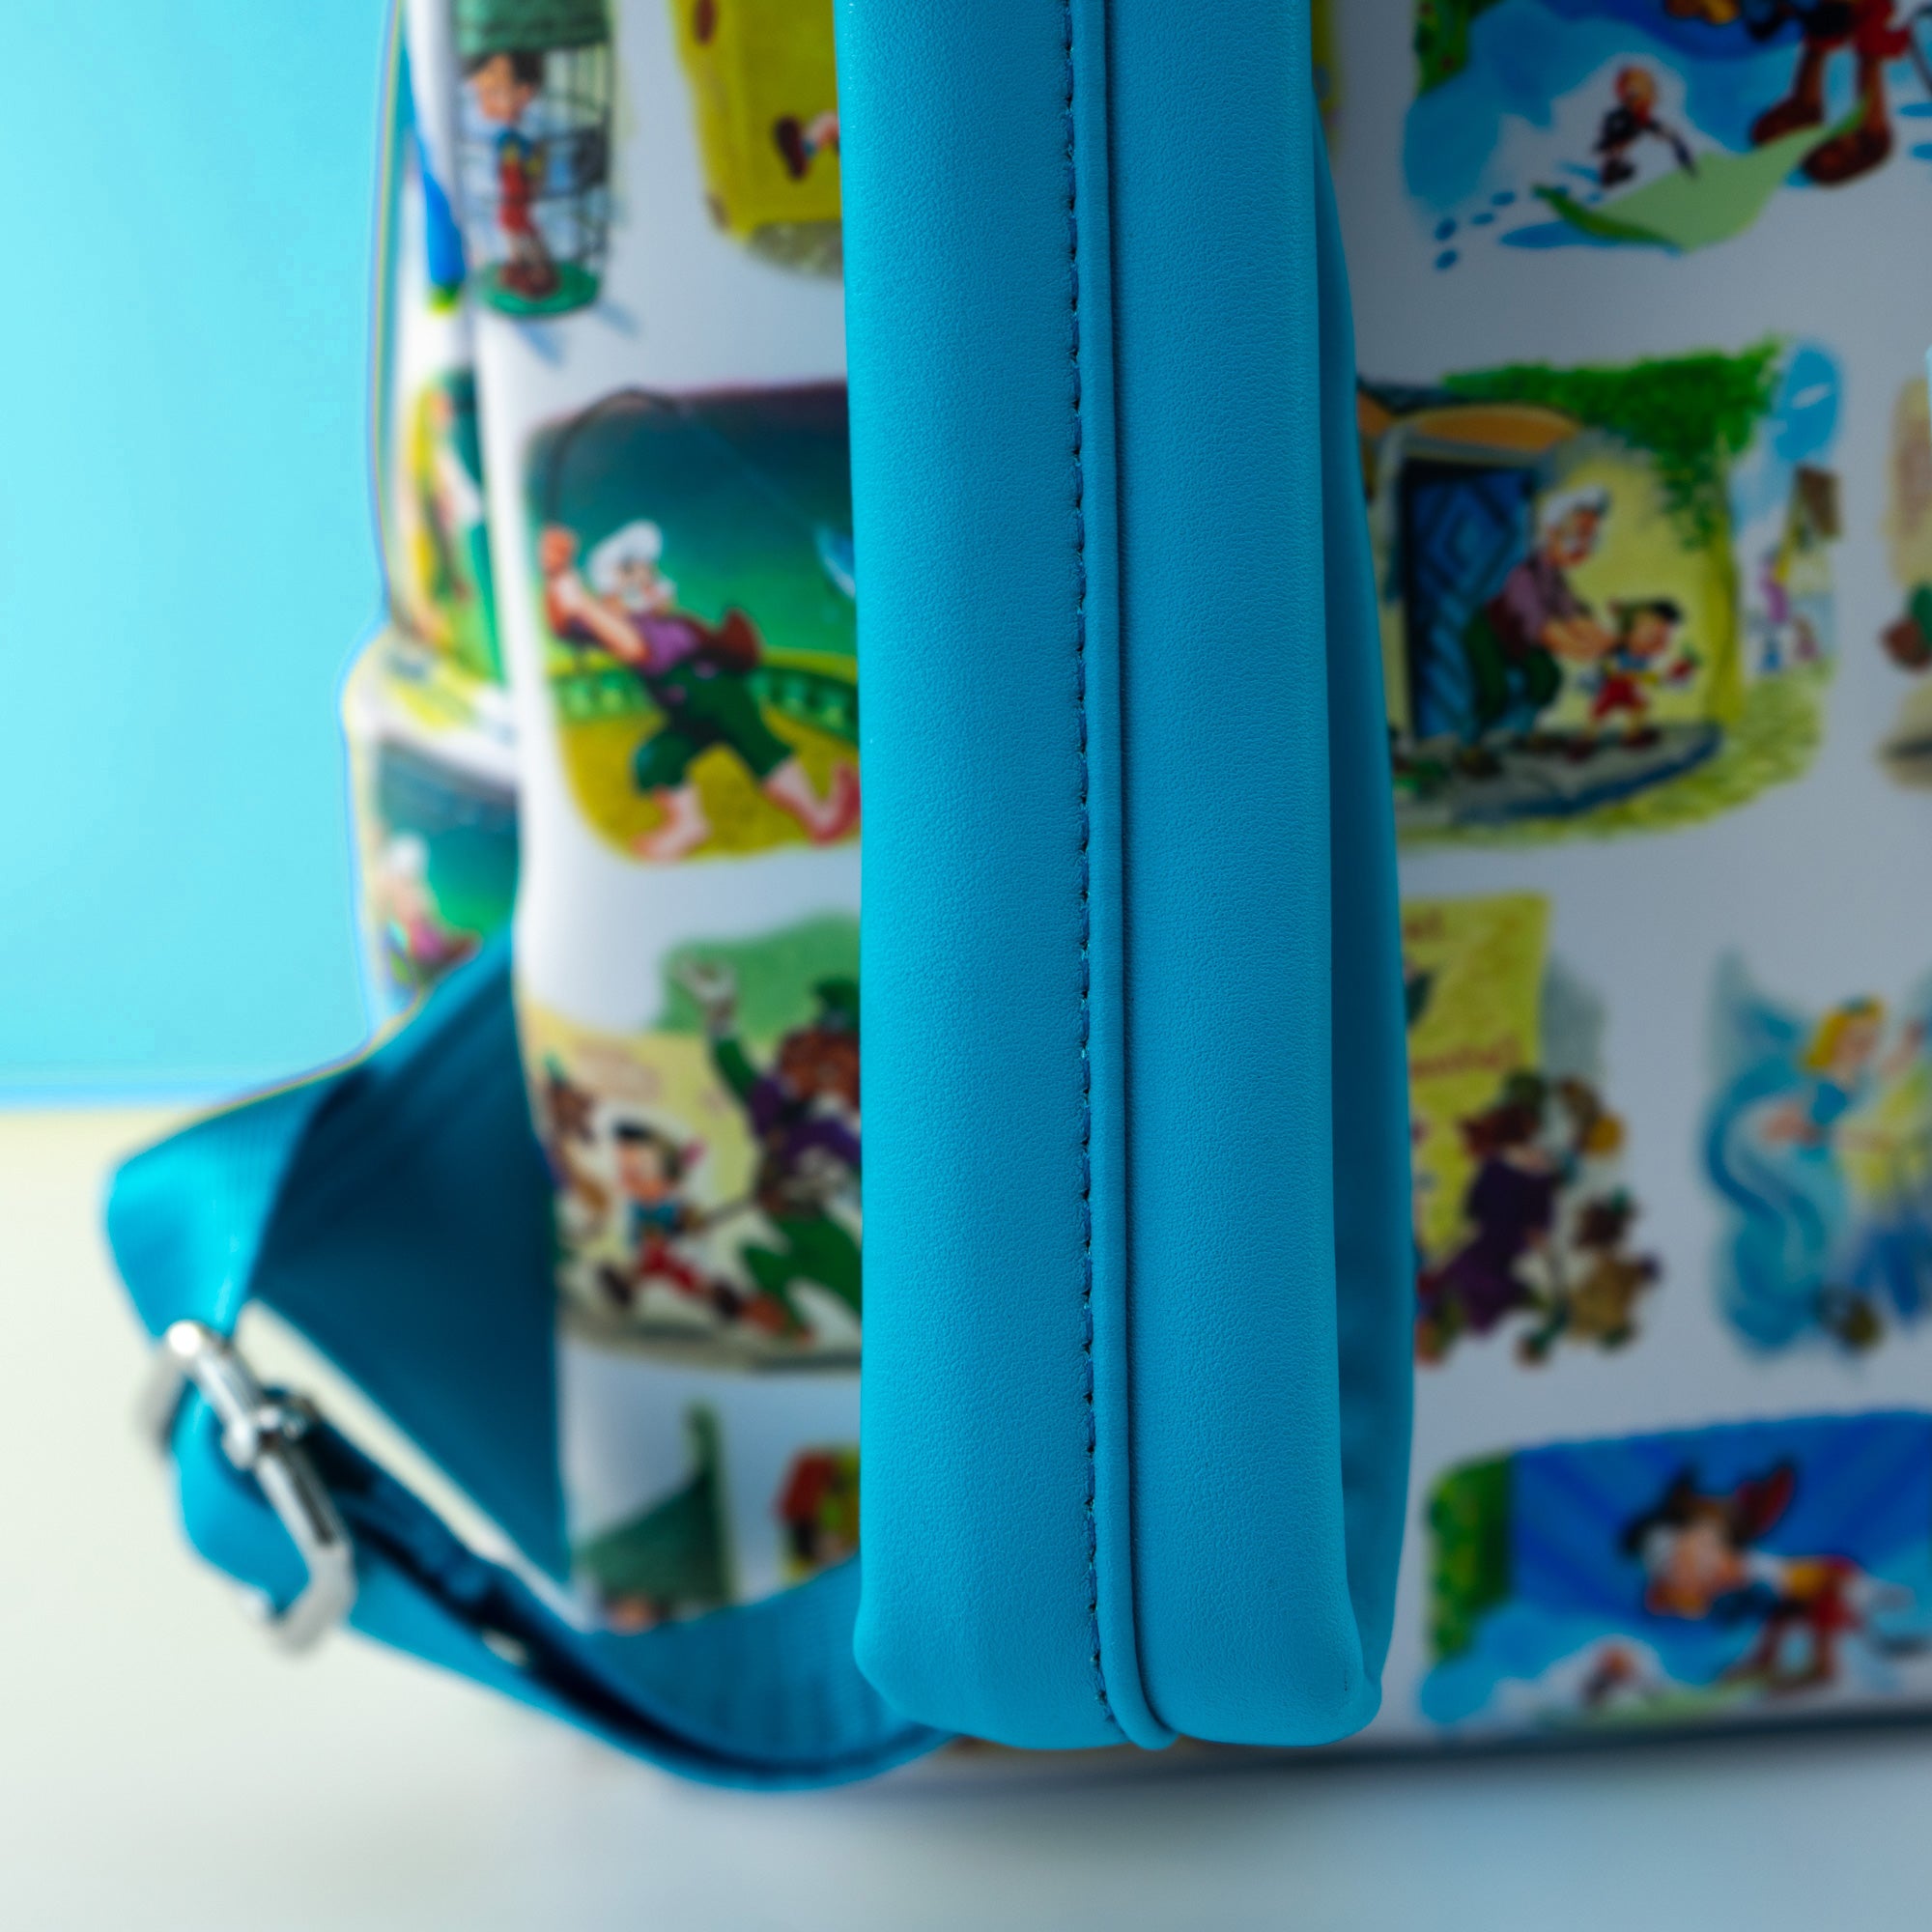 Loungefly x Disney Pinocchio Paintings AOP Mini Backpack